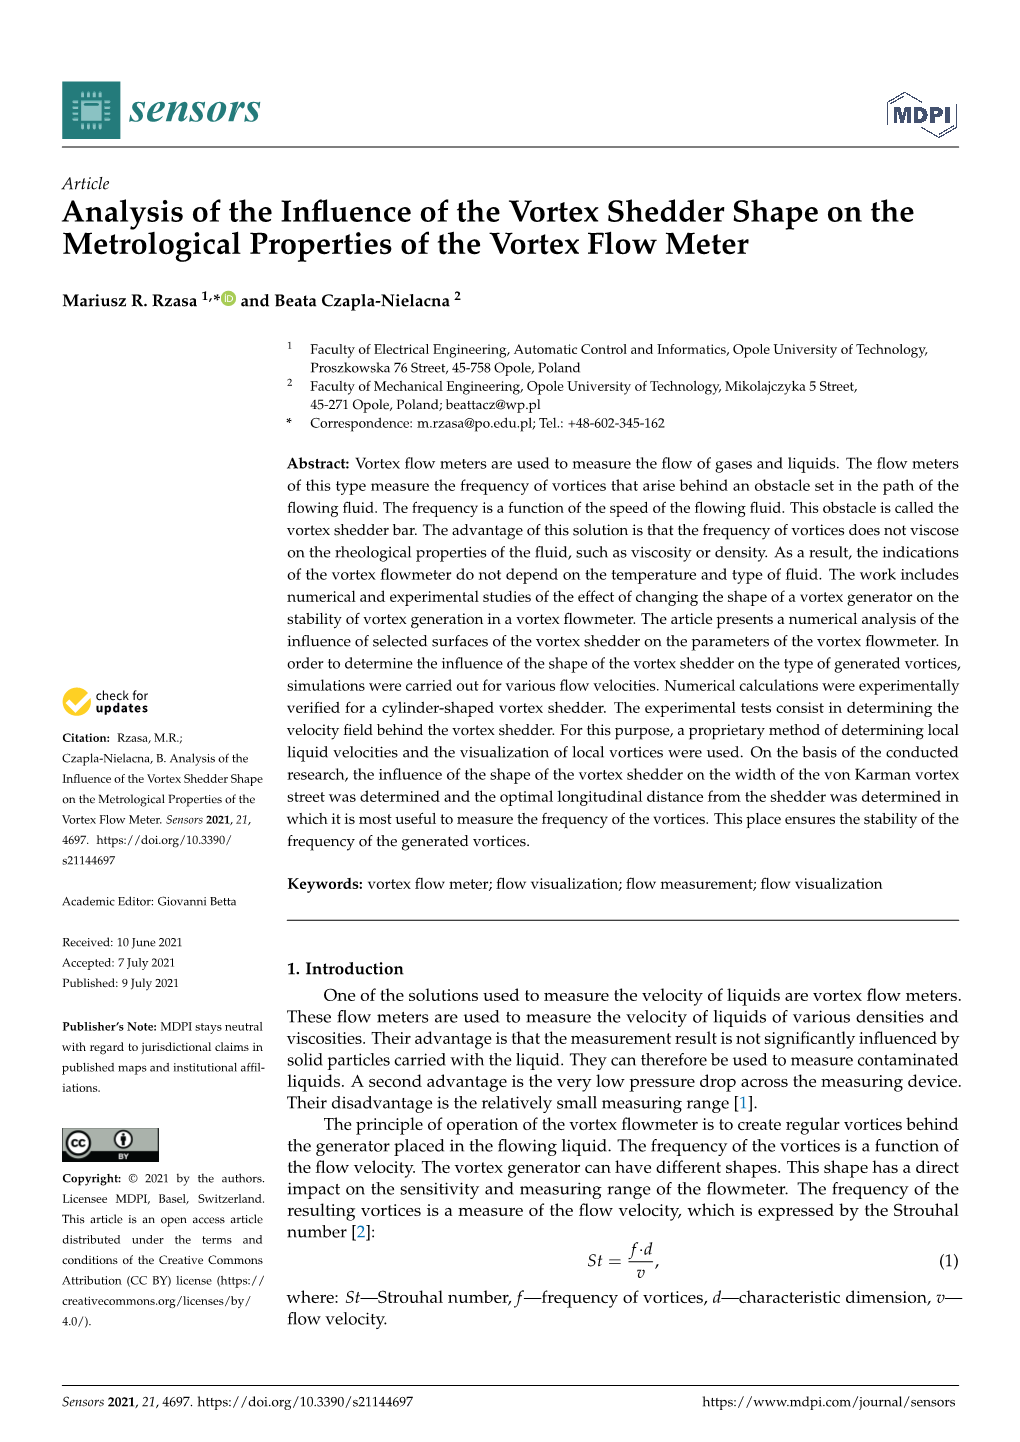 Analysis of the Influence of the Vortex Shedder Shape on the Metrological